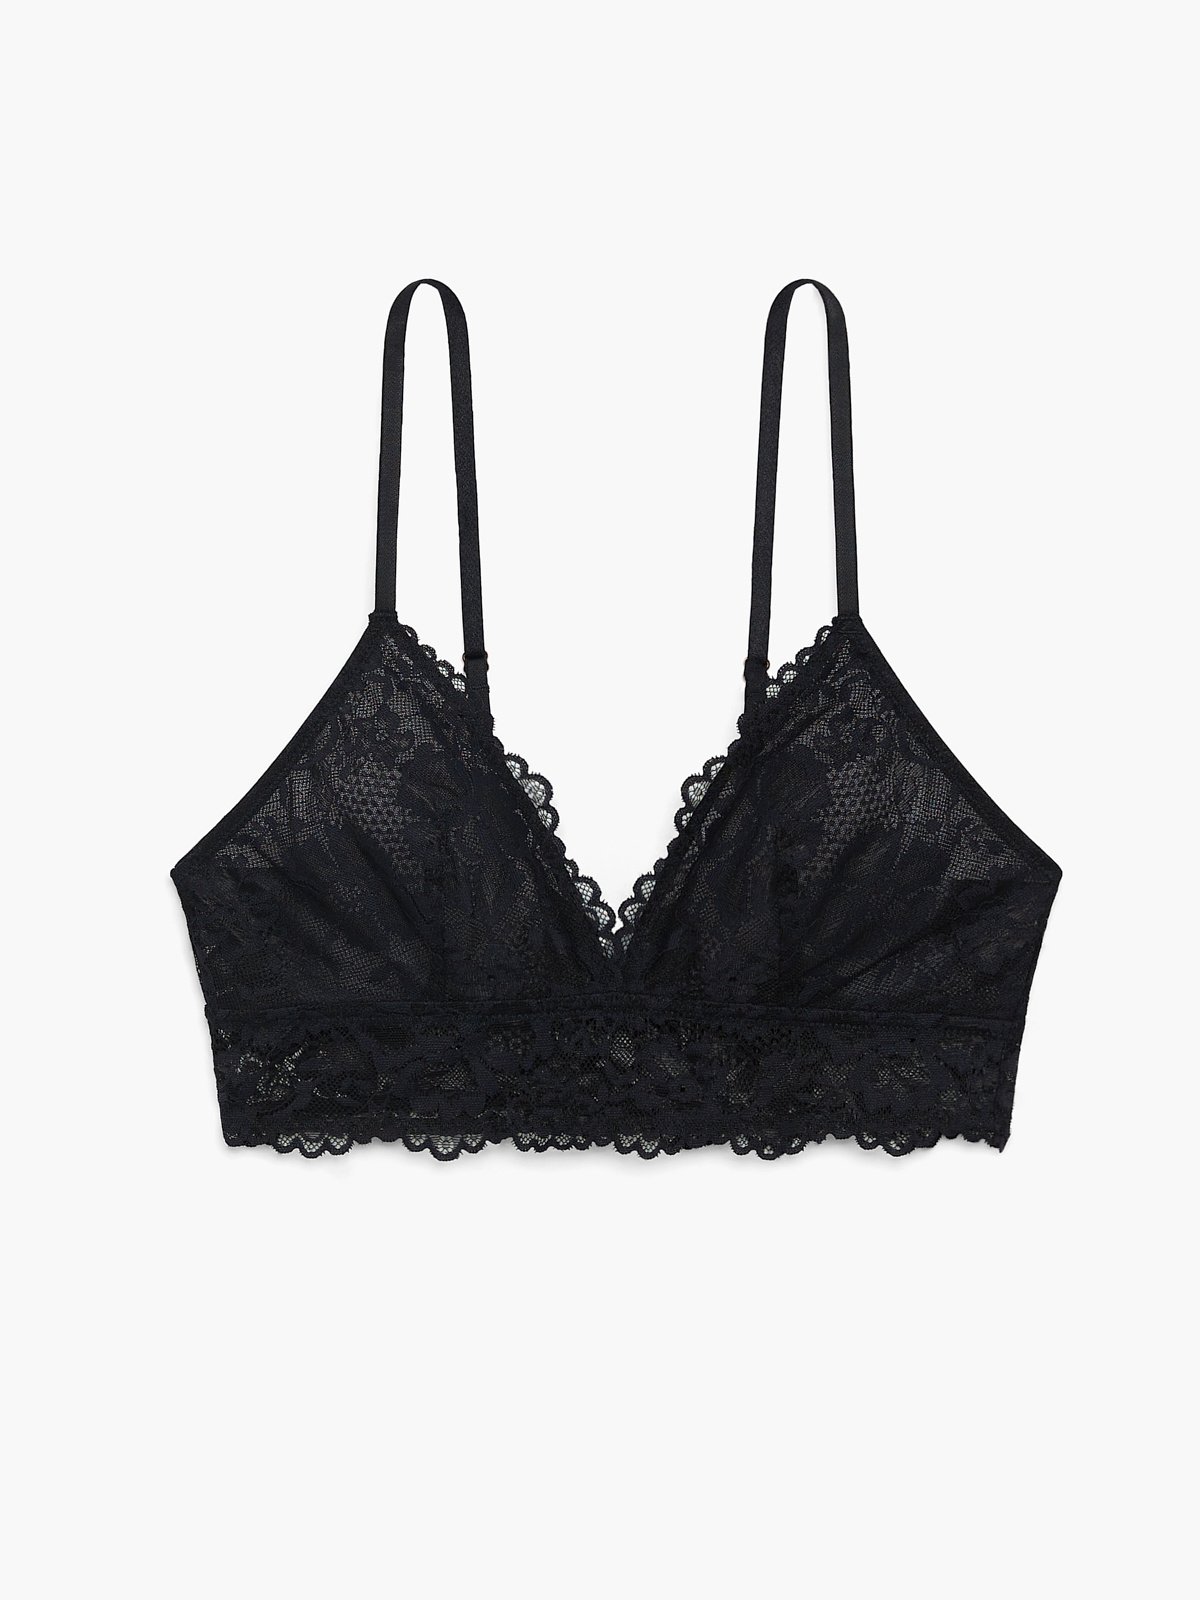 Floral Lace Triangle Bralette in Black | SAVAGE X FENTY